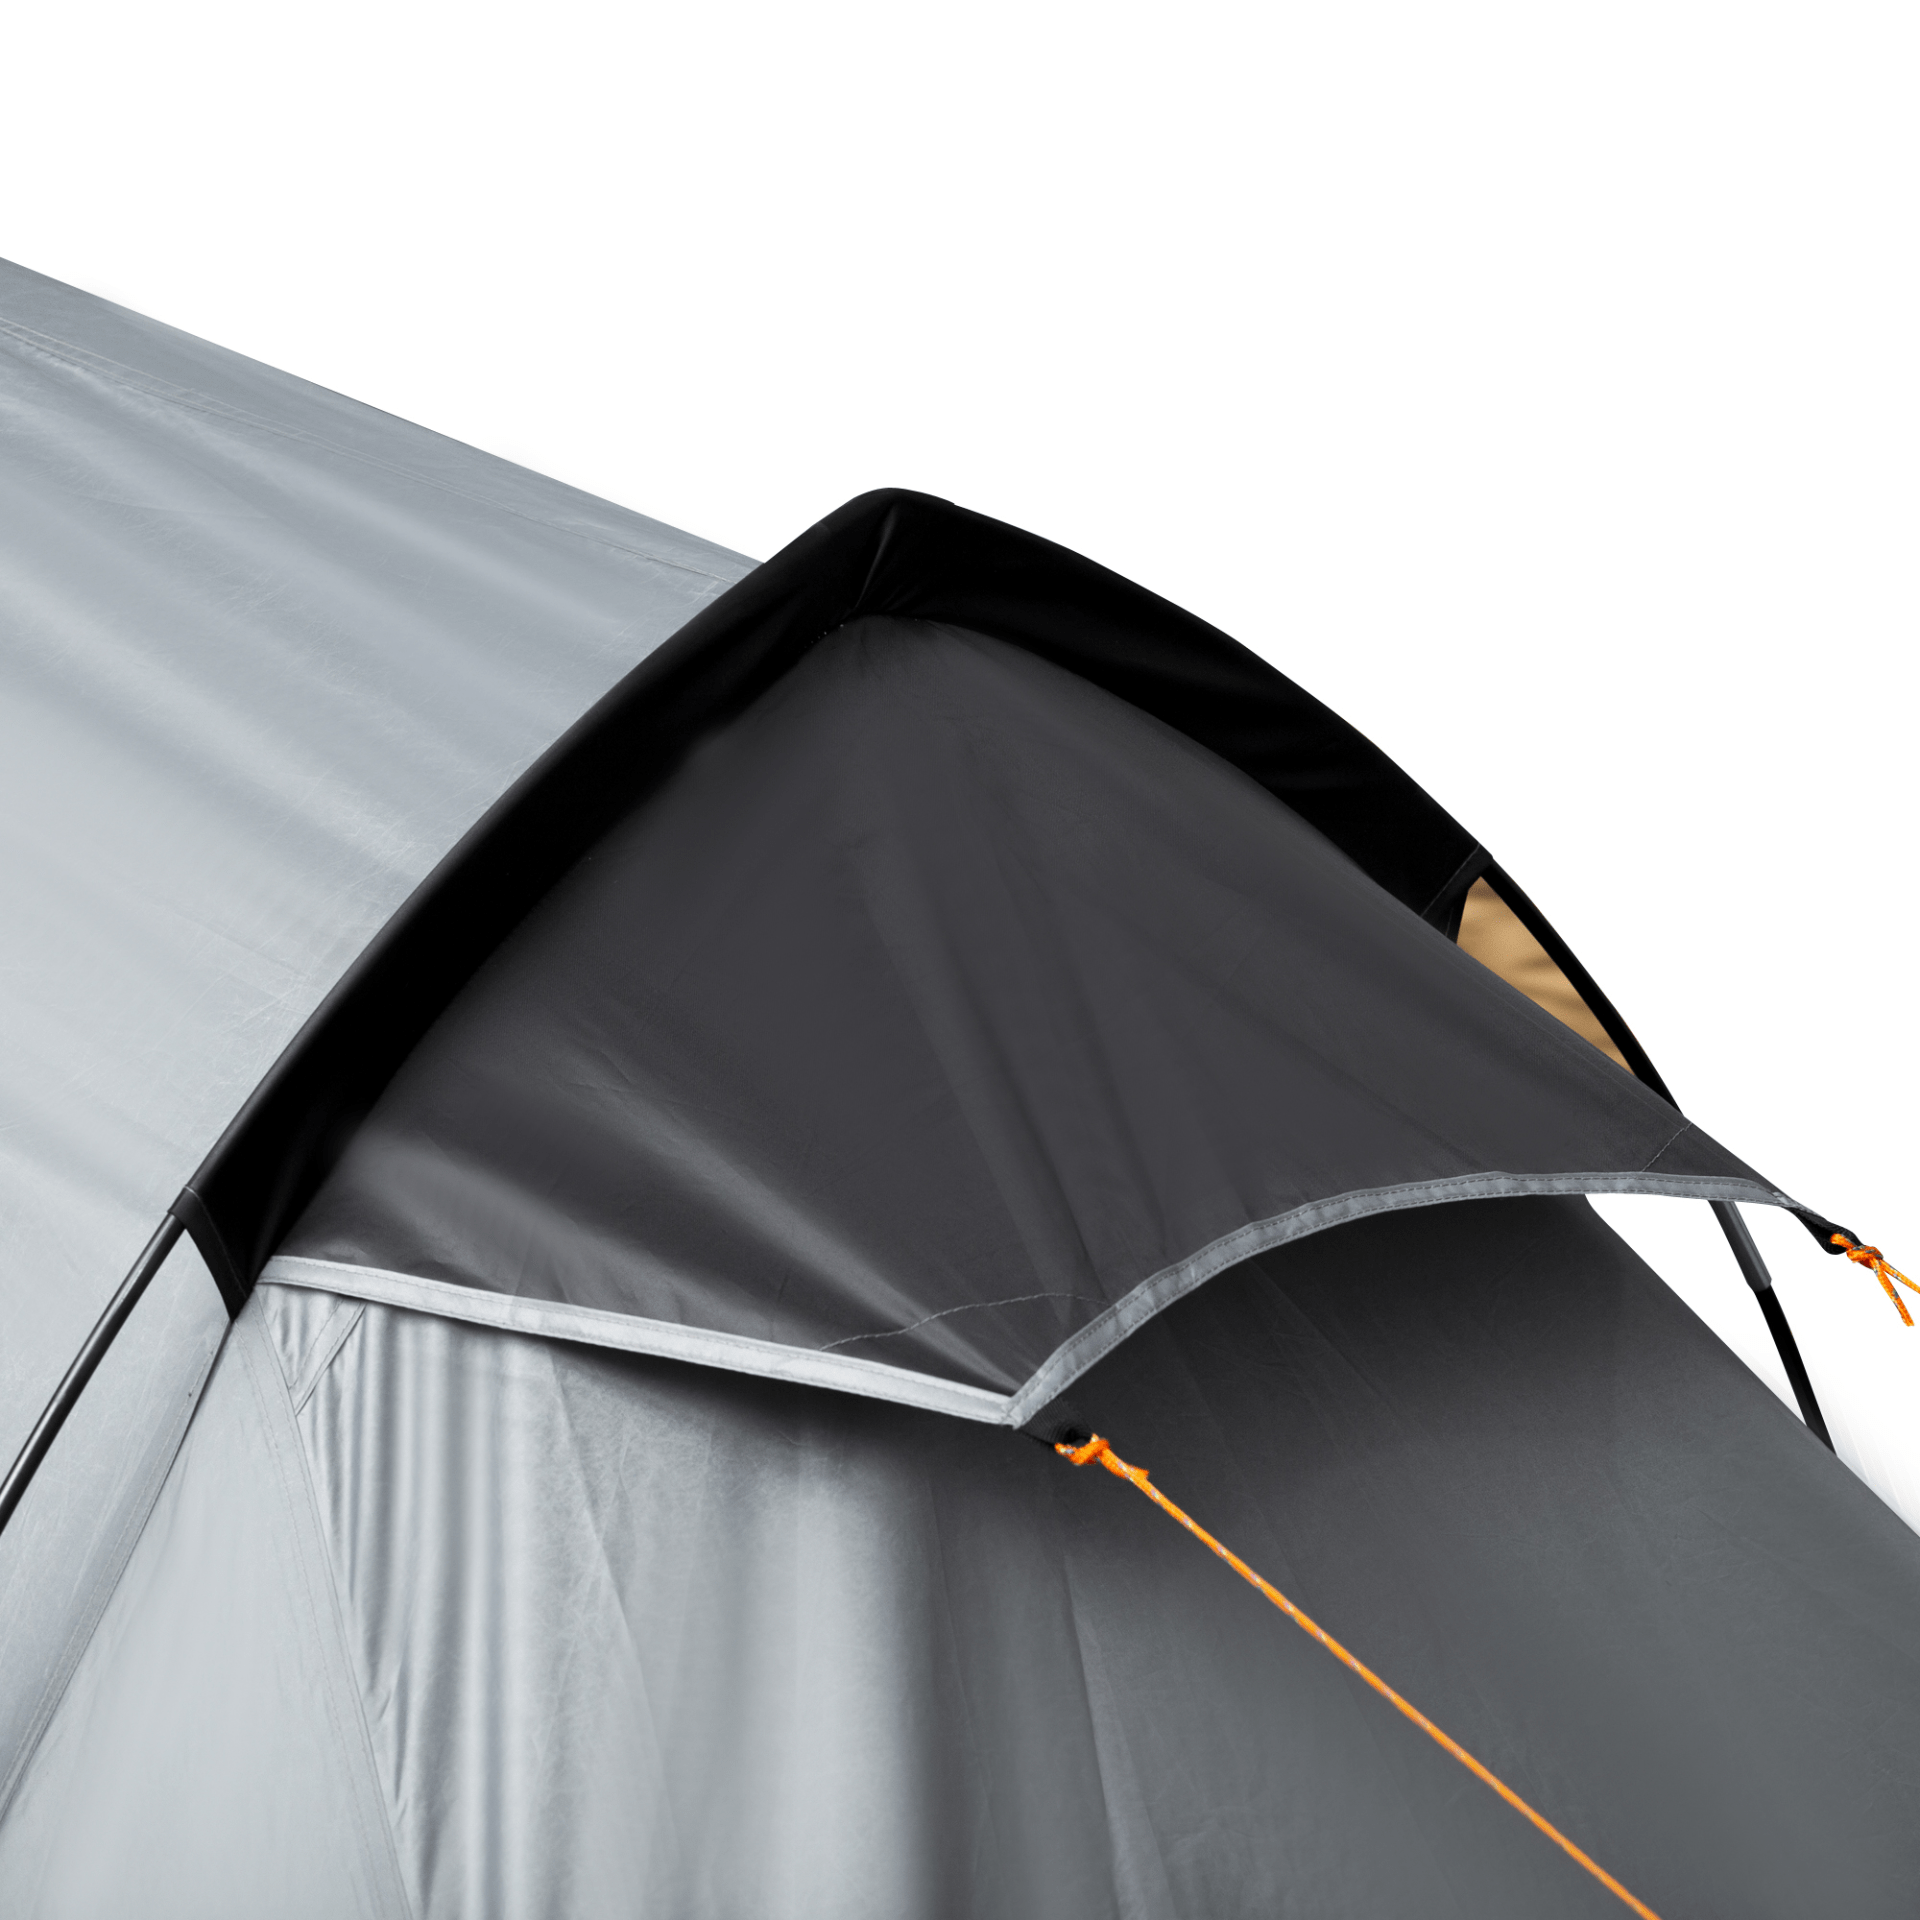 Outsunny 1-2 Man Camping Tunnel Tent 2 Man Tent Cosy Camping Co.   